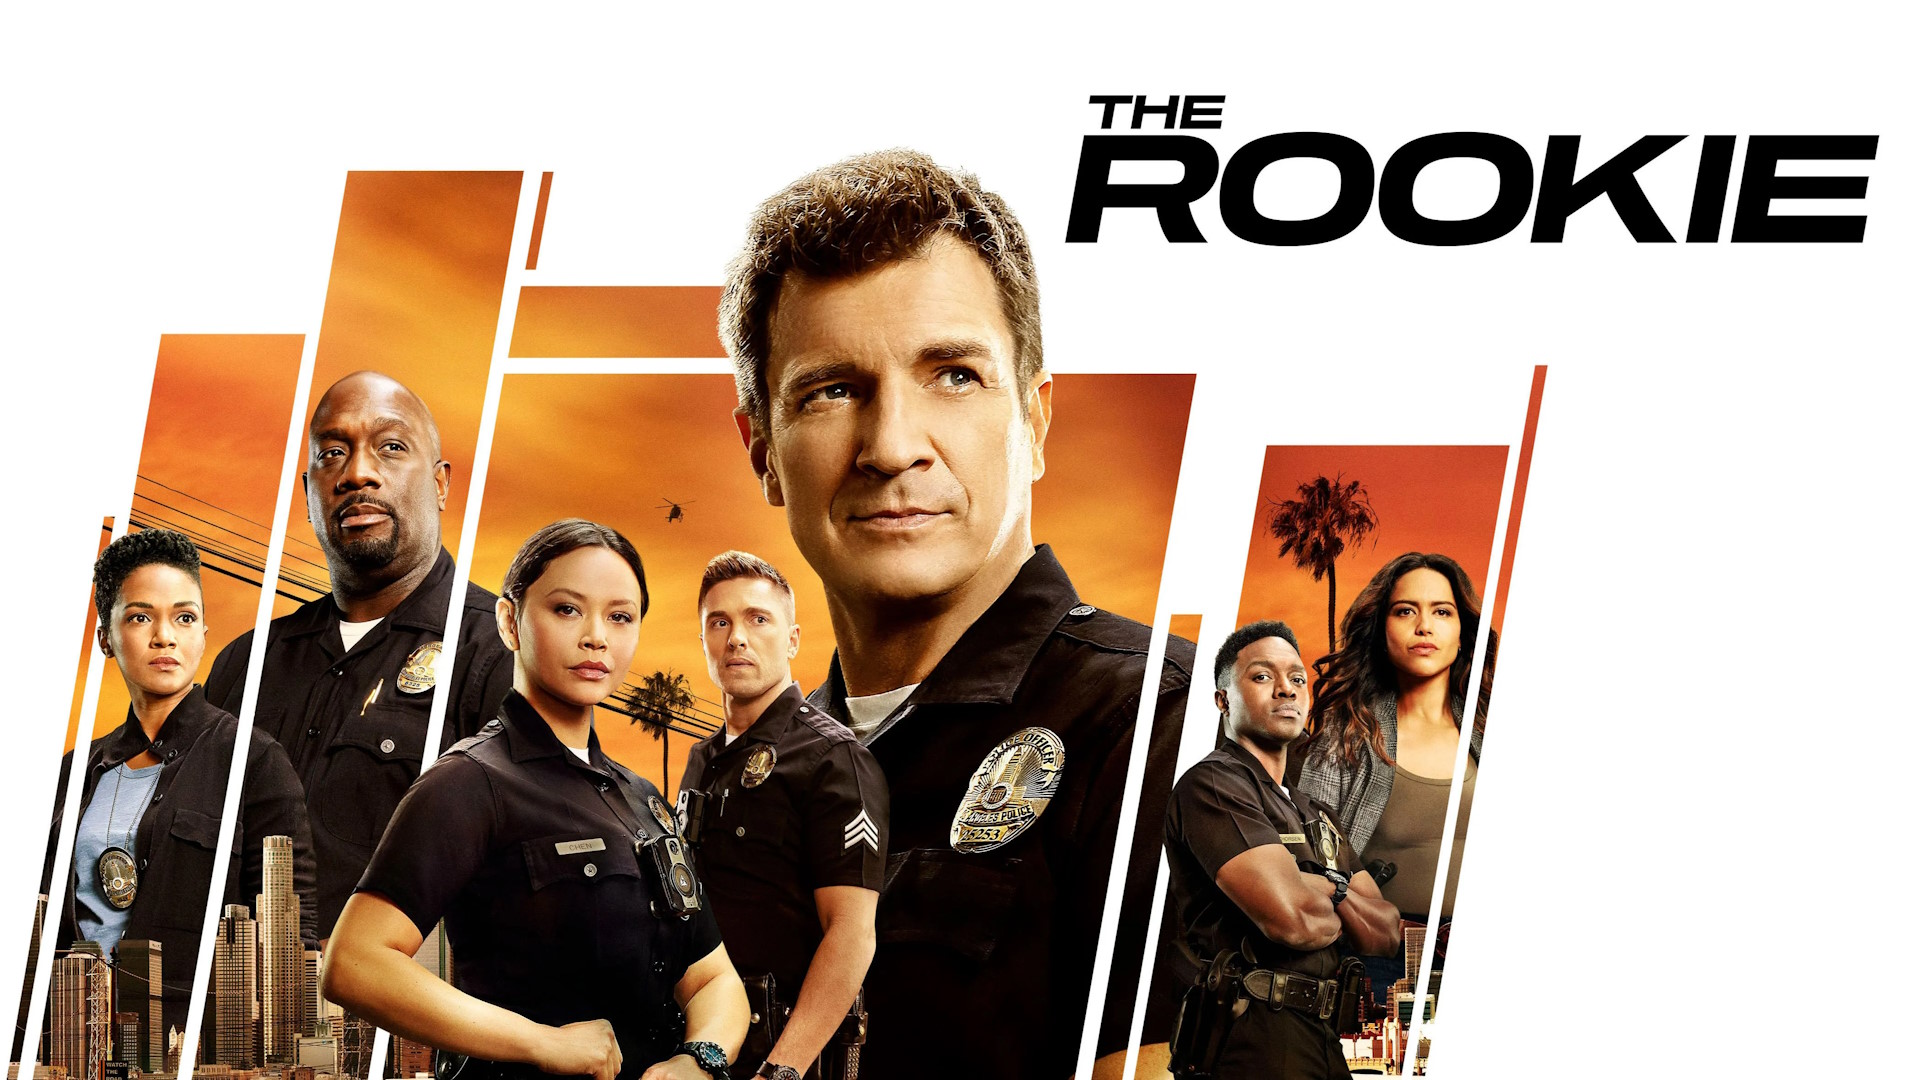 The Rookie season 6: Release date, rumors, and more Android Authority